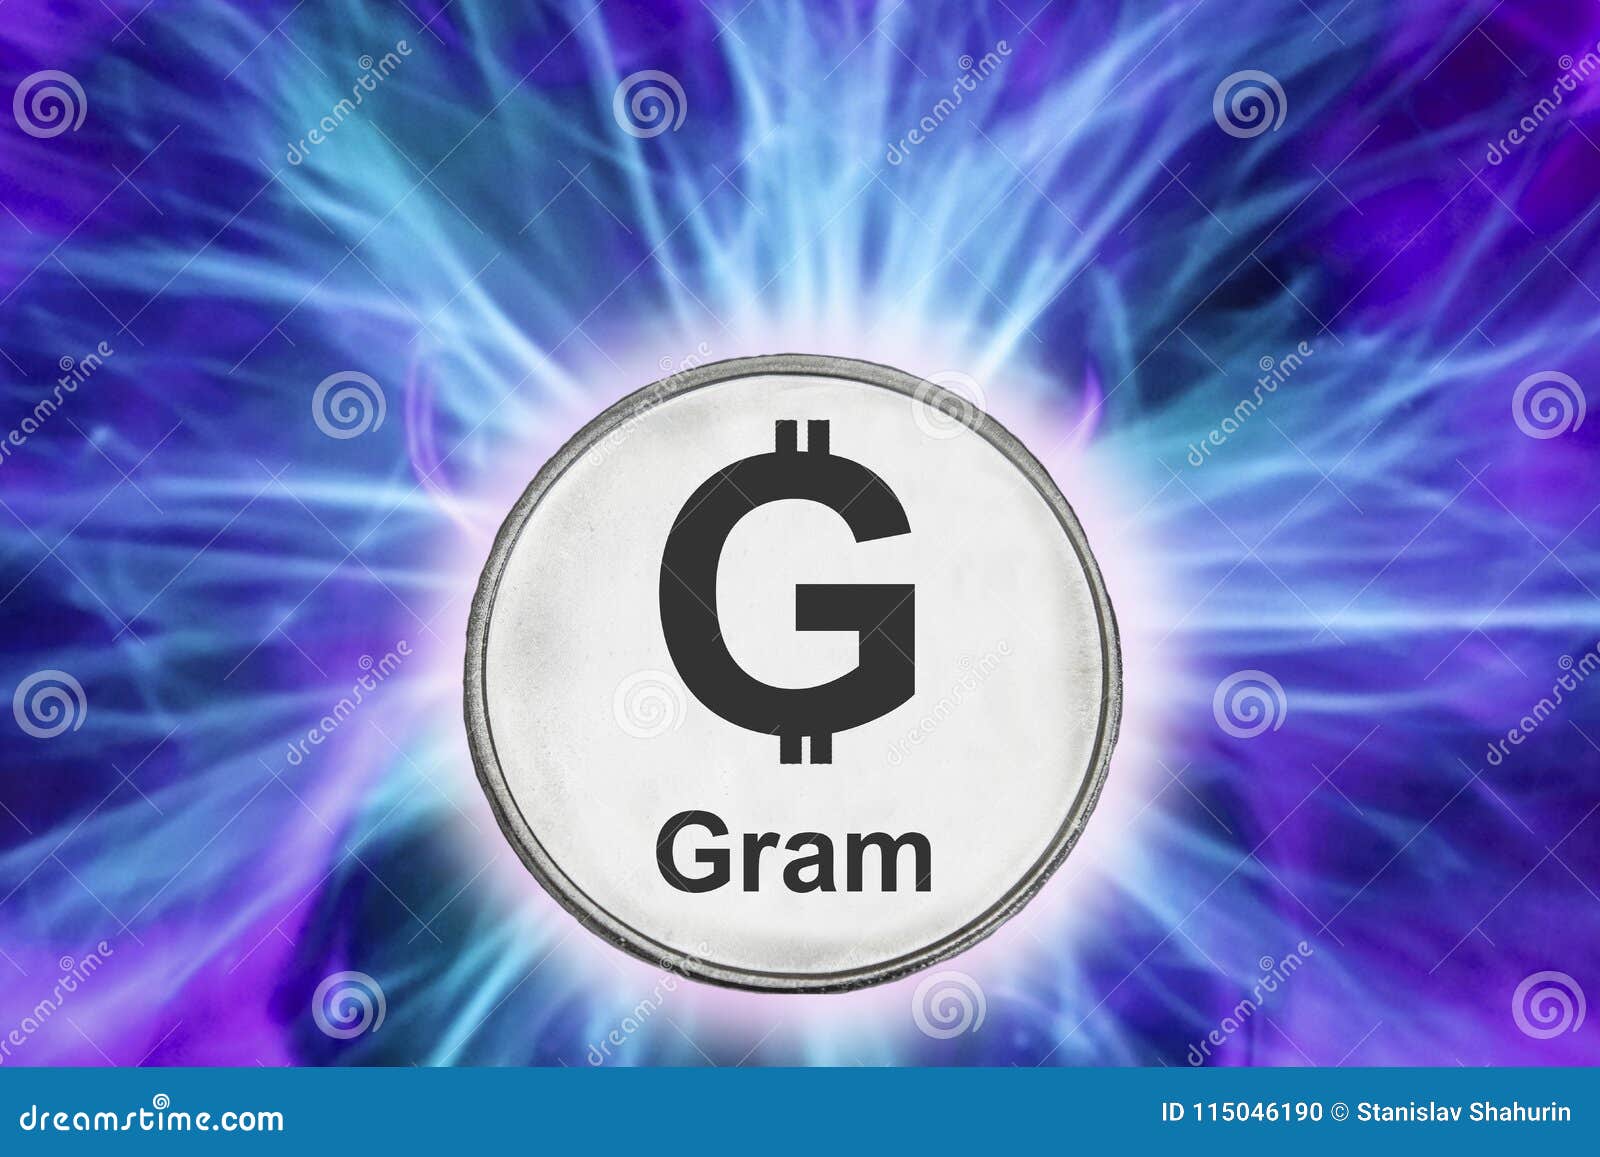 gram cryptocurrency